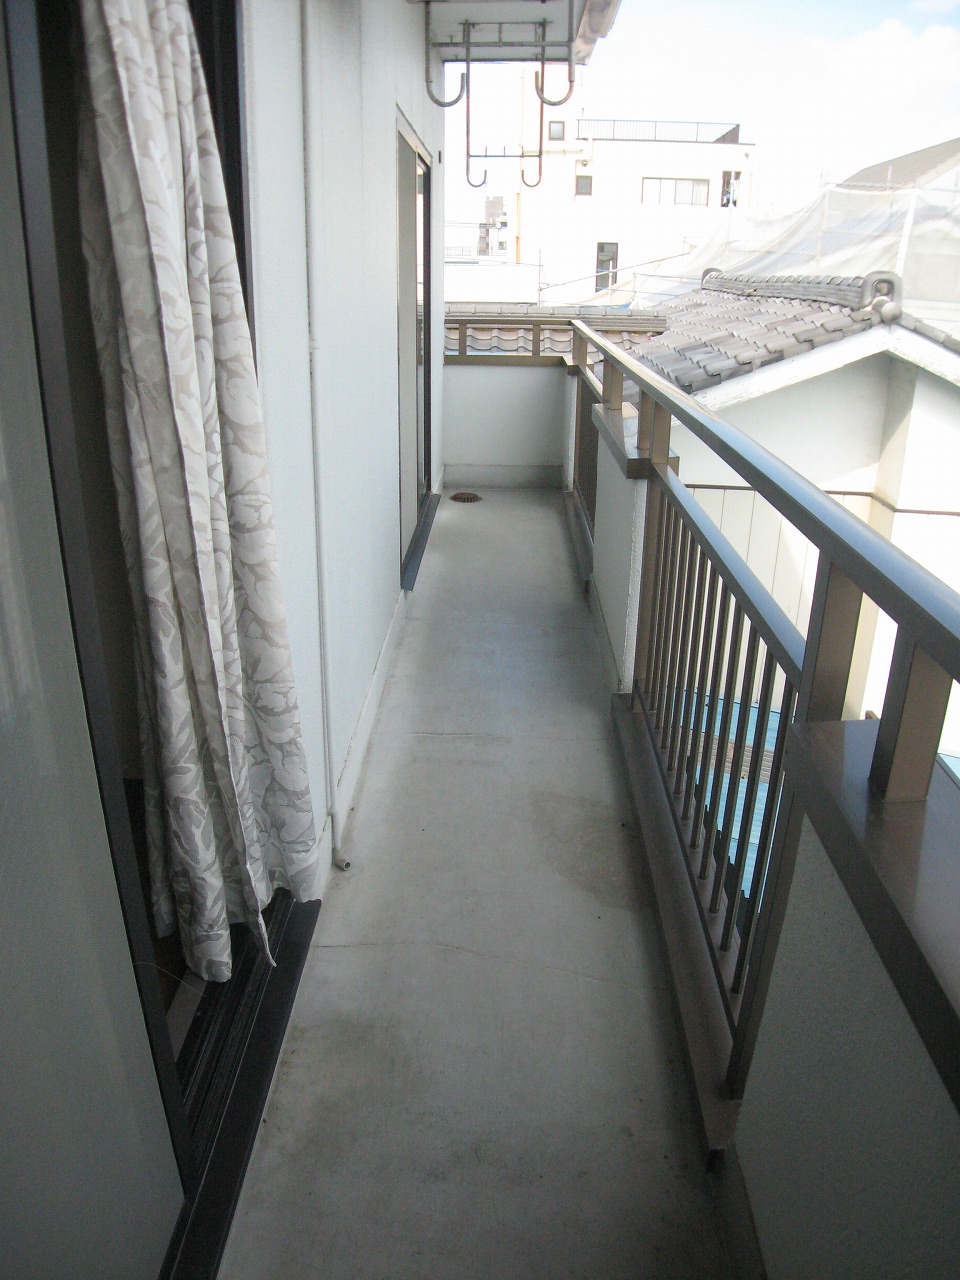 Balcony. Since the rooms of the third floor part, View is also good